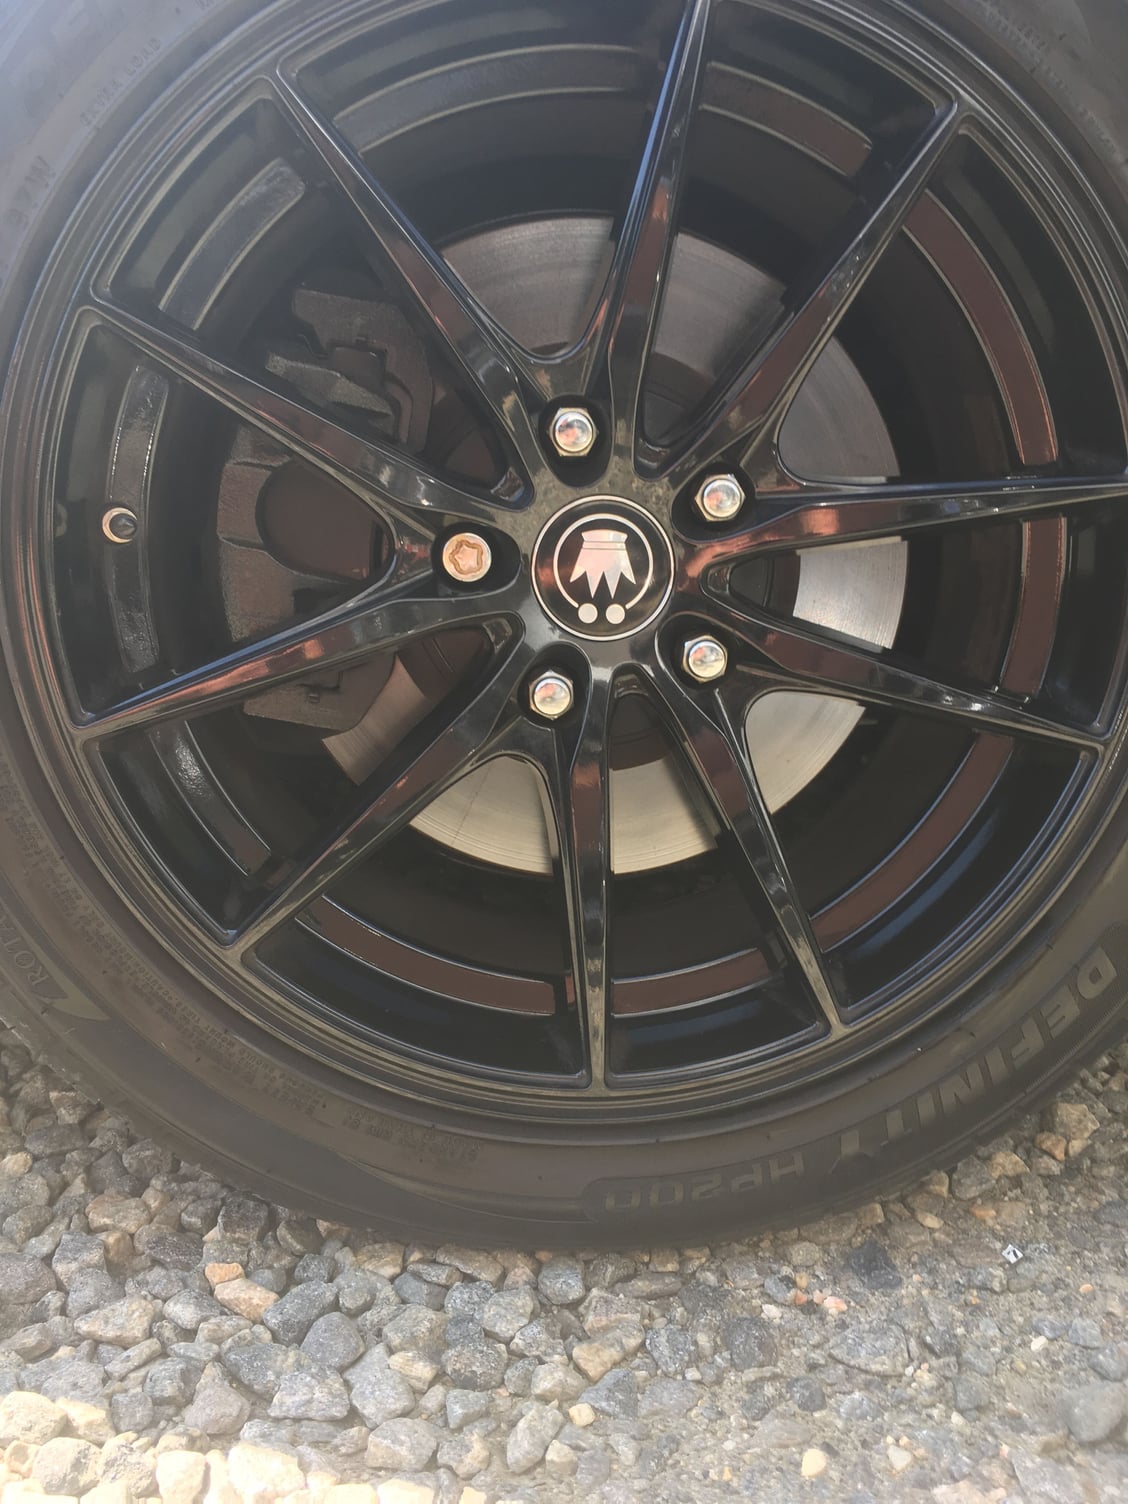 Miscellaneous - FS: Wheels and 3g TL parts - Used - All Years Acura All Models - Fredericksburg, VA 22408, United States